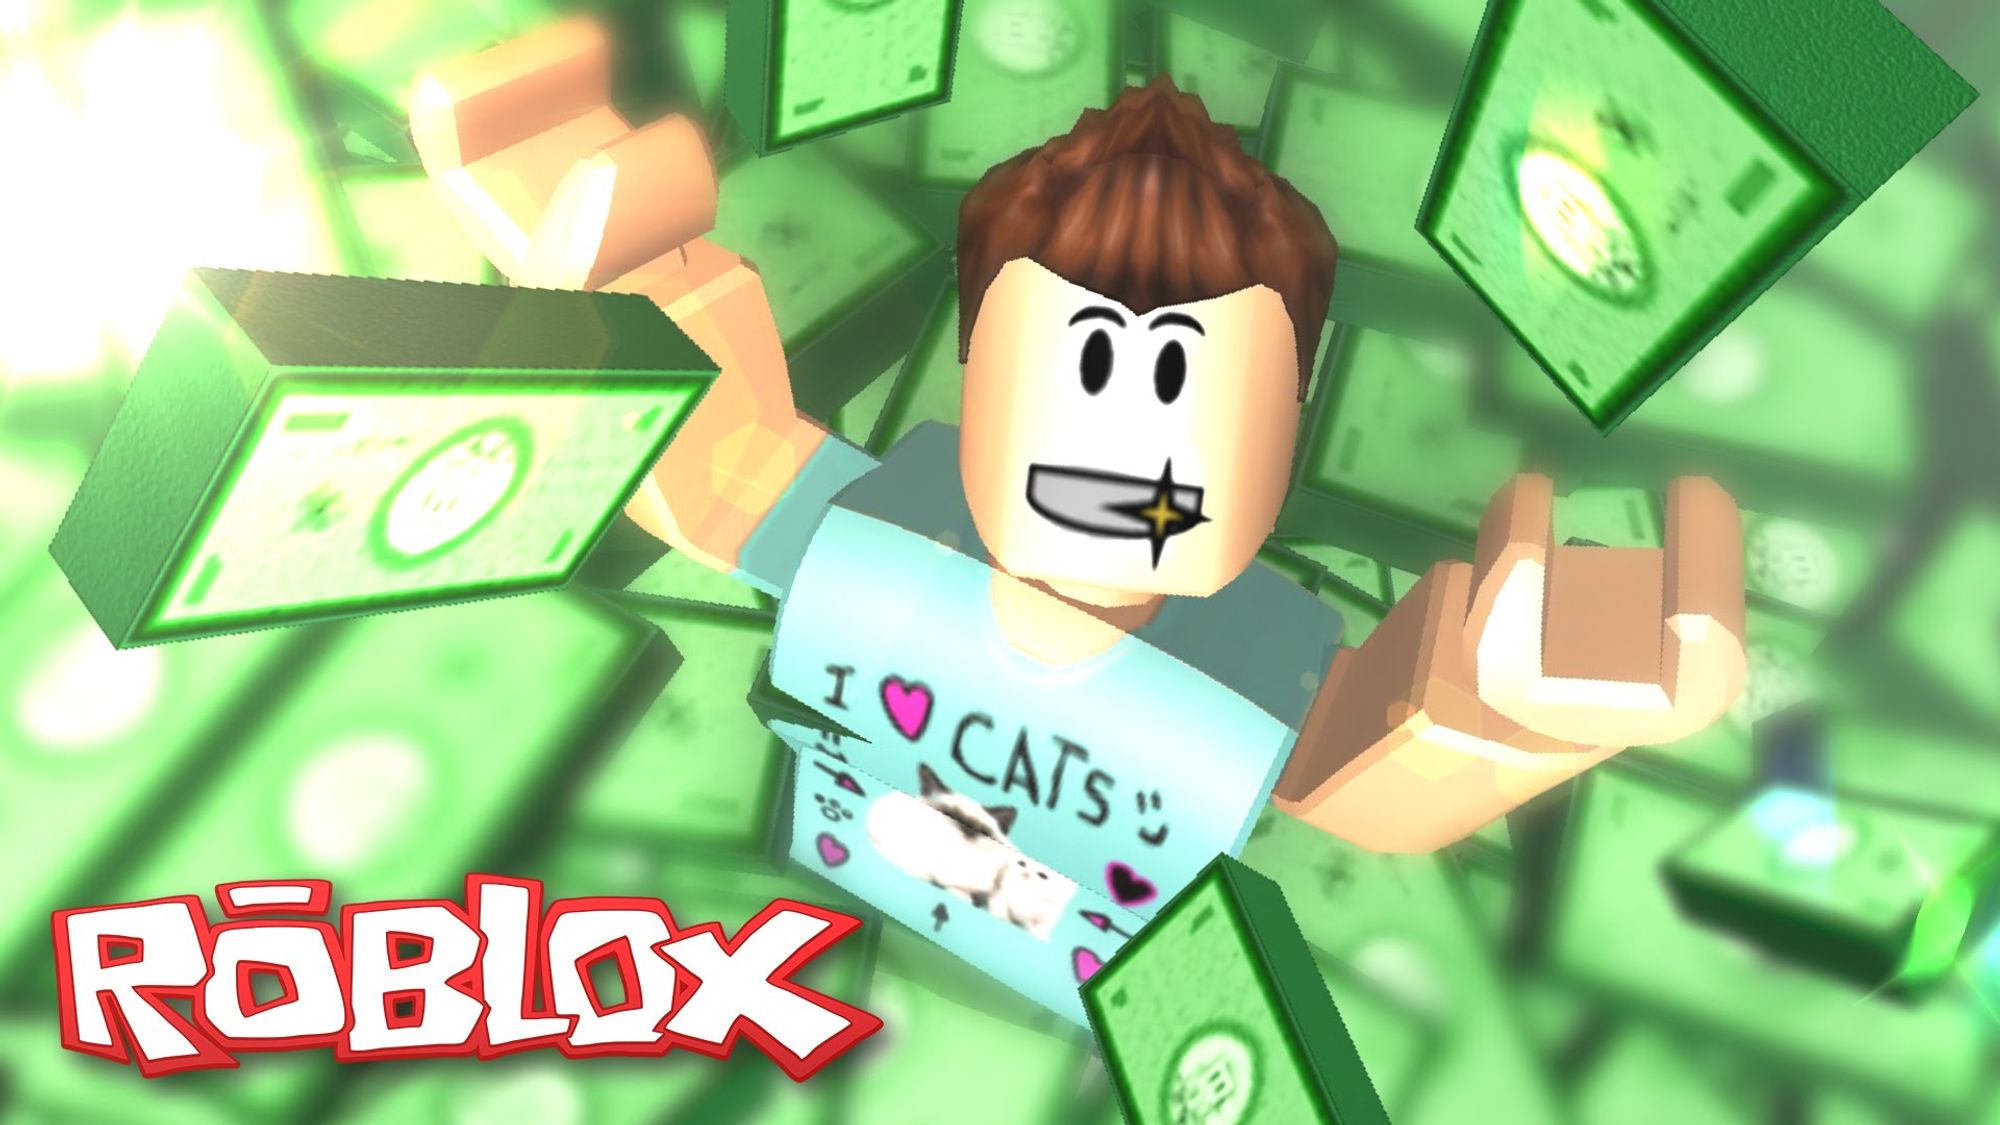 Free Robux Generator Free Robux How To Get Roblox Free Robux 2020 How To Use Our Robux Generator - reliant driving game roblox